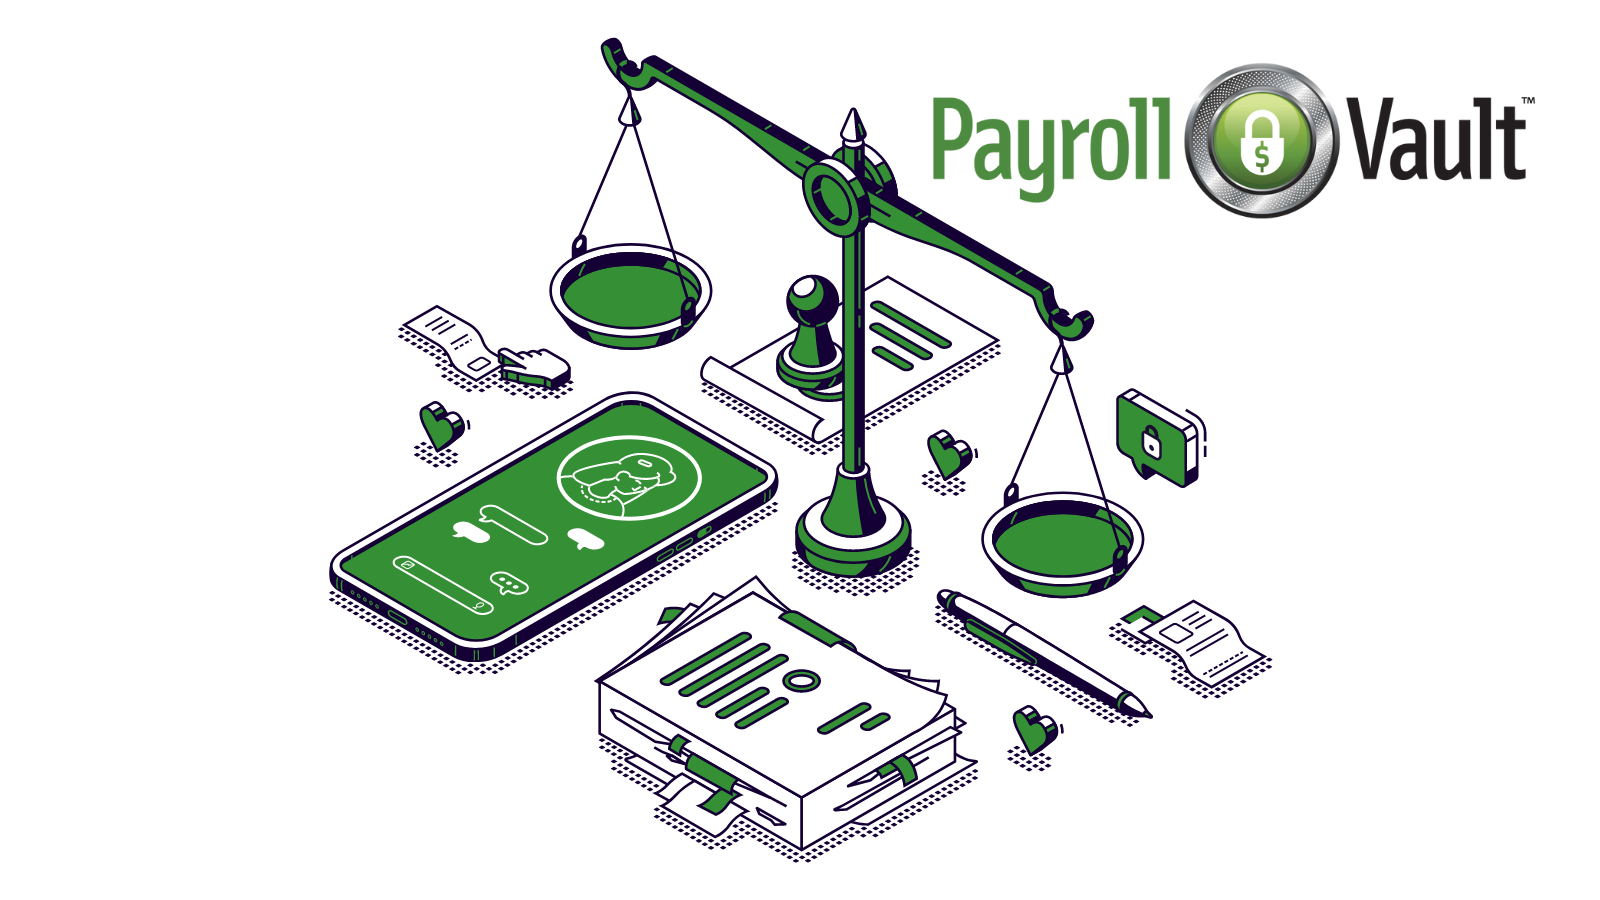 Payroll Direct Deposit: A Guide for Getting Your Company Set Up